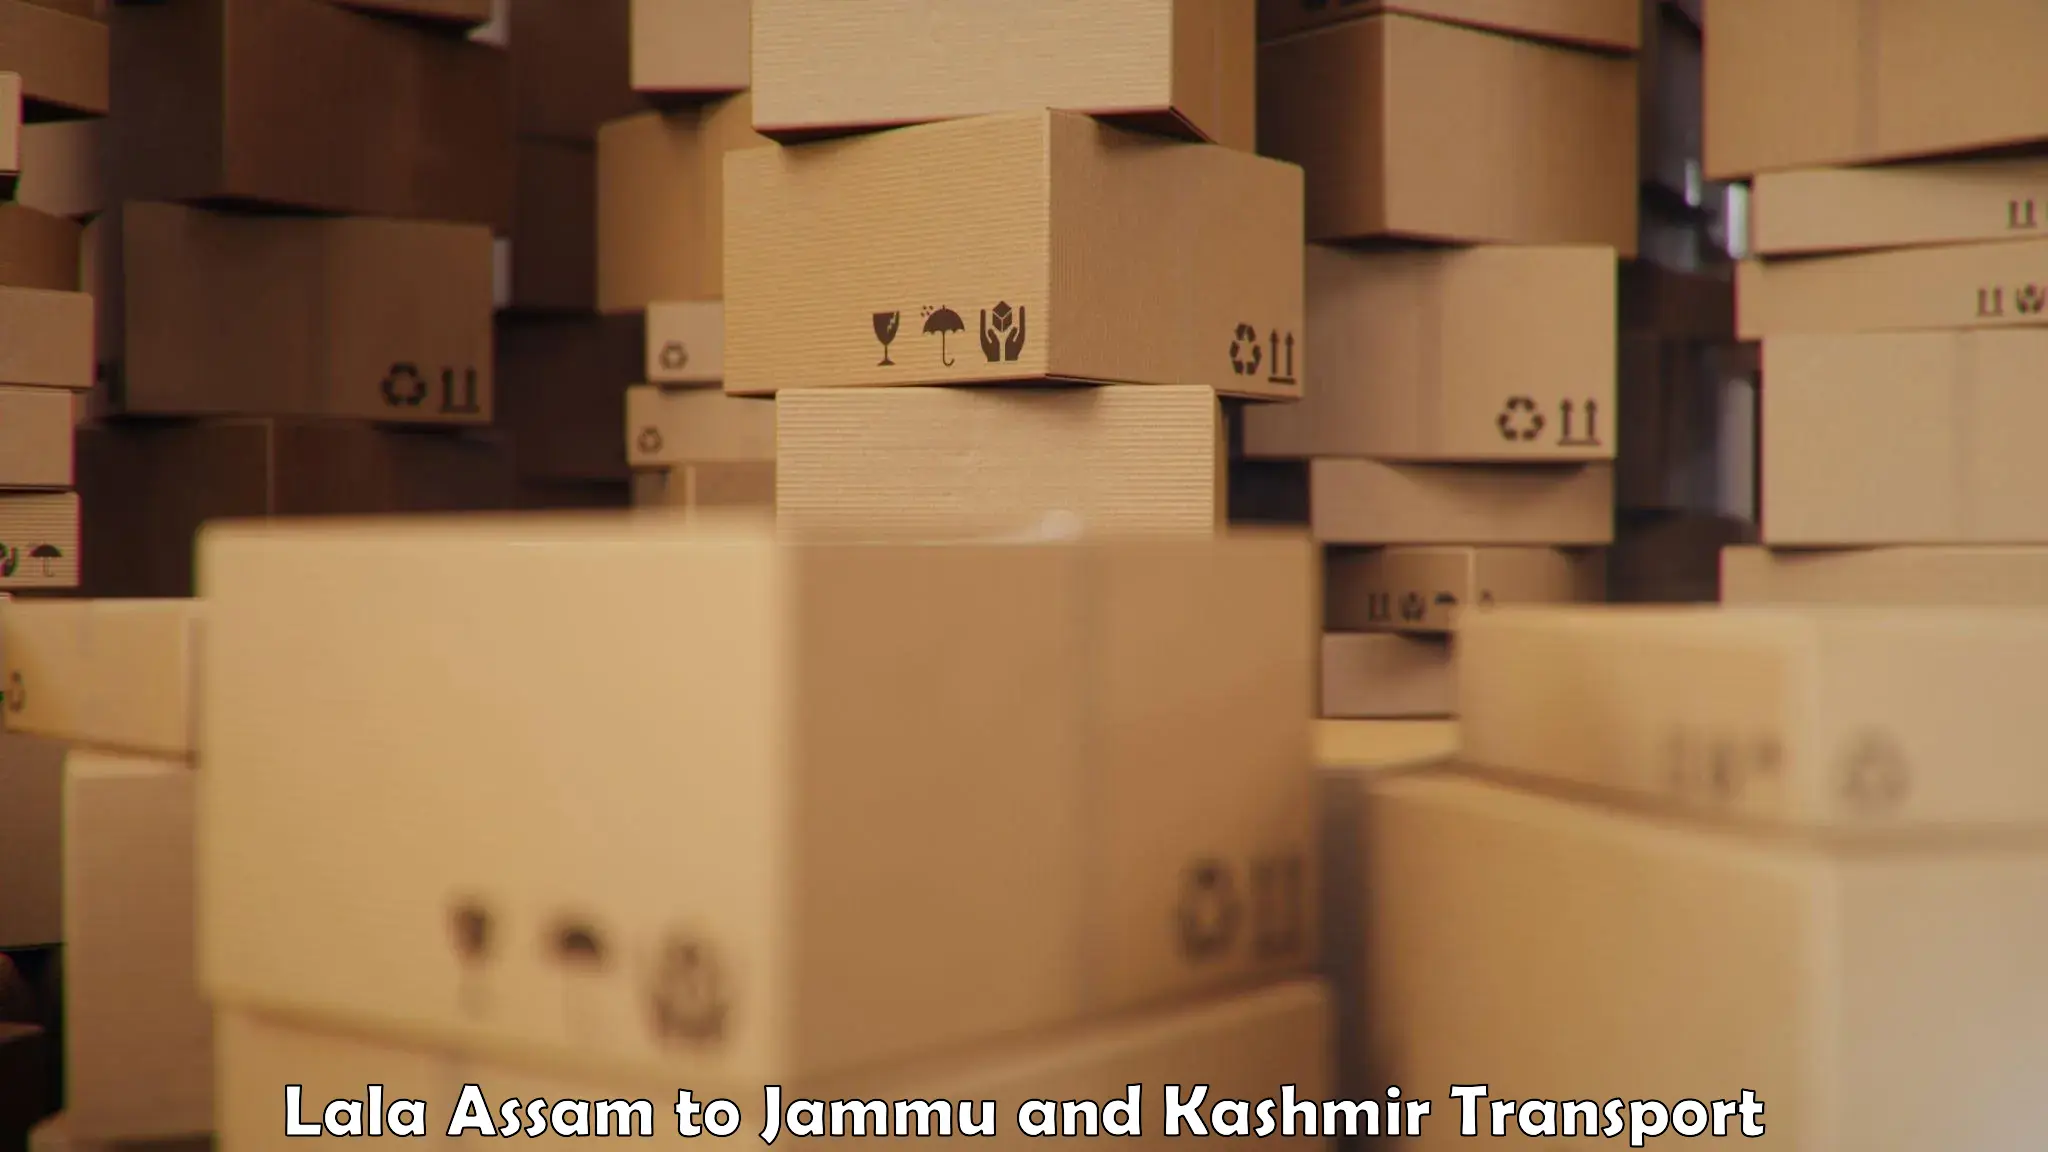 Truck transport companies in India Lala Assam to Sopore